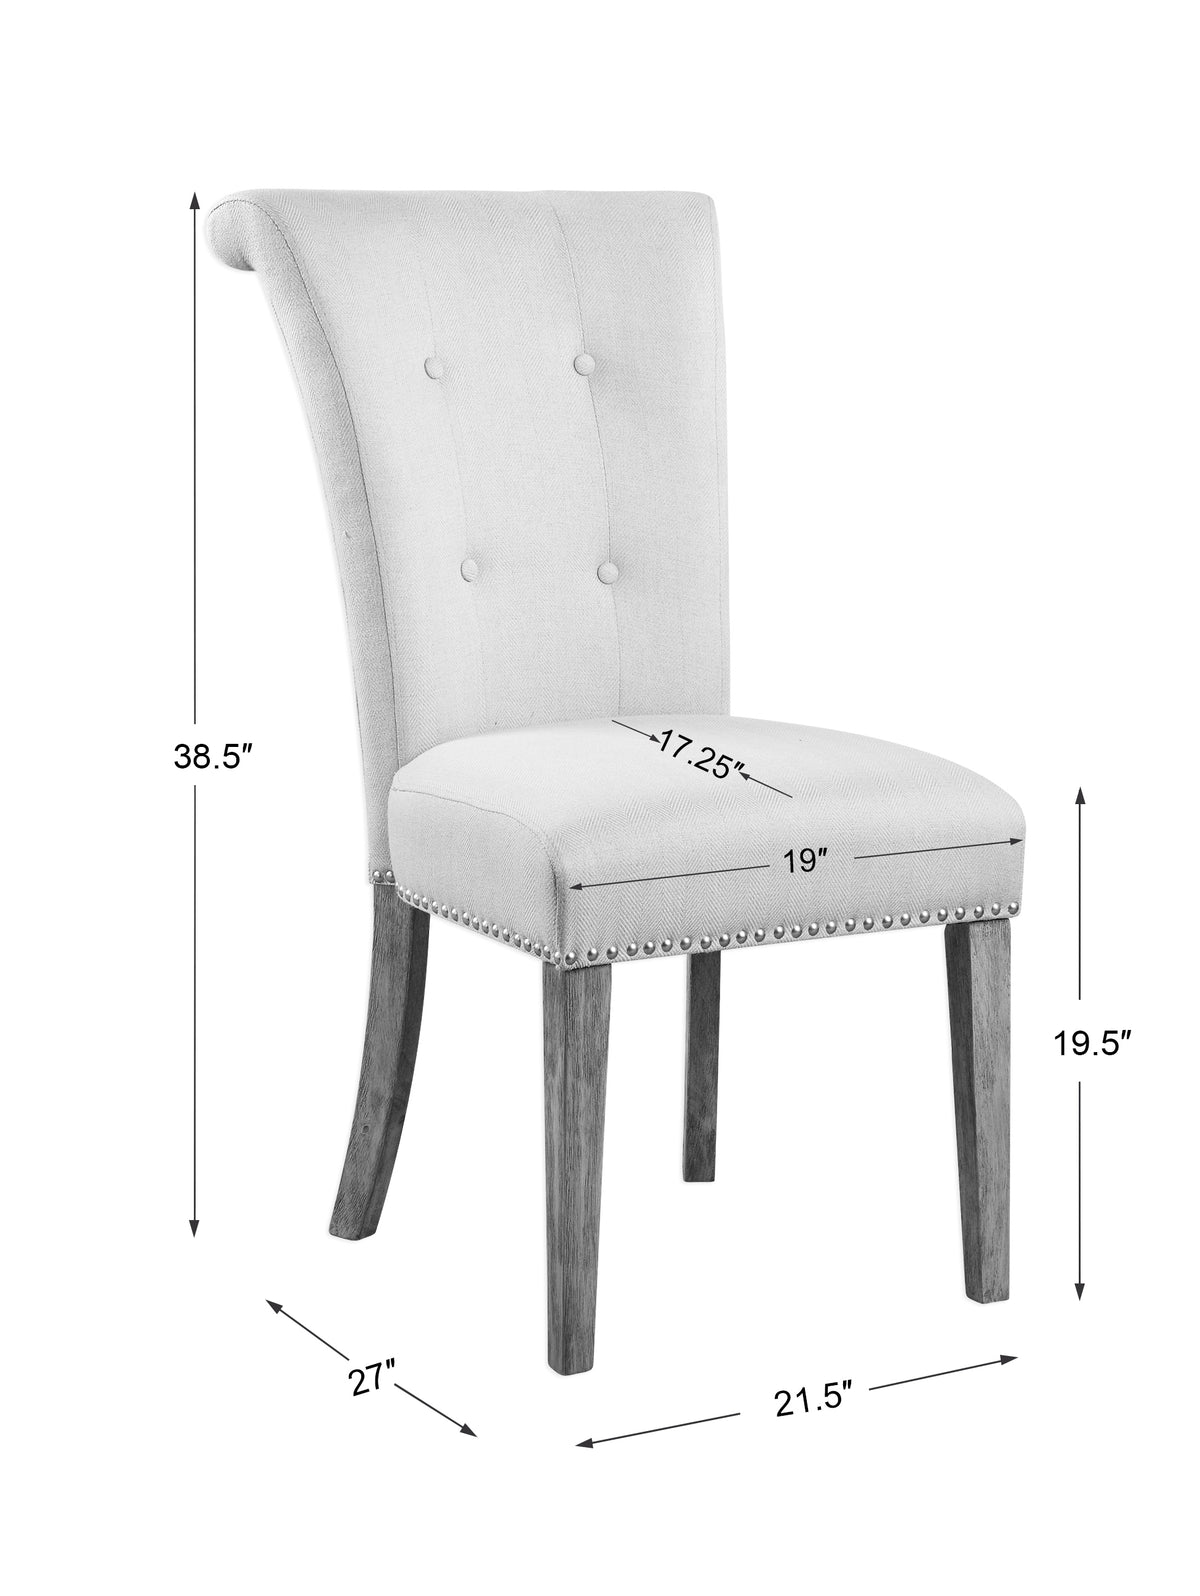 Uttermost Lucasse Oatmeal Dining Chair